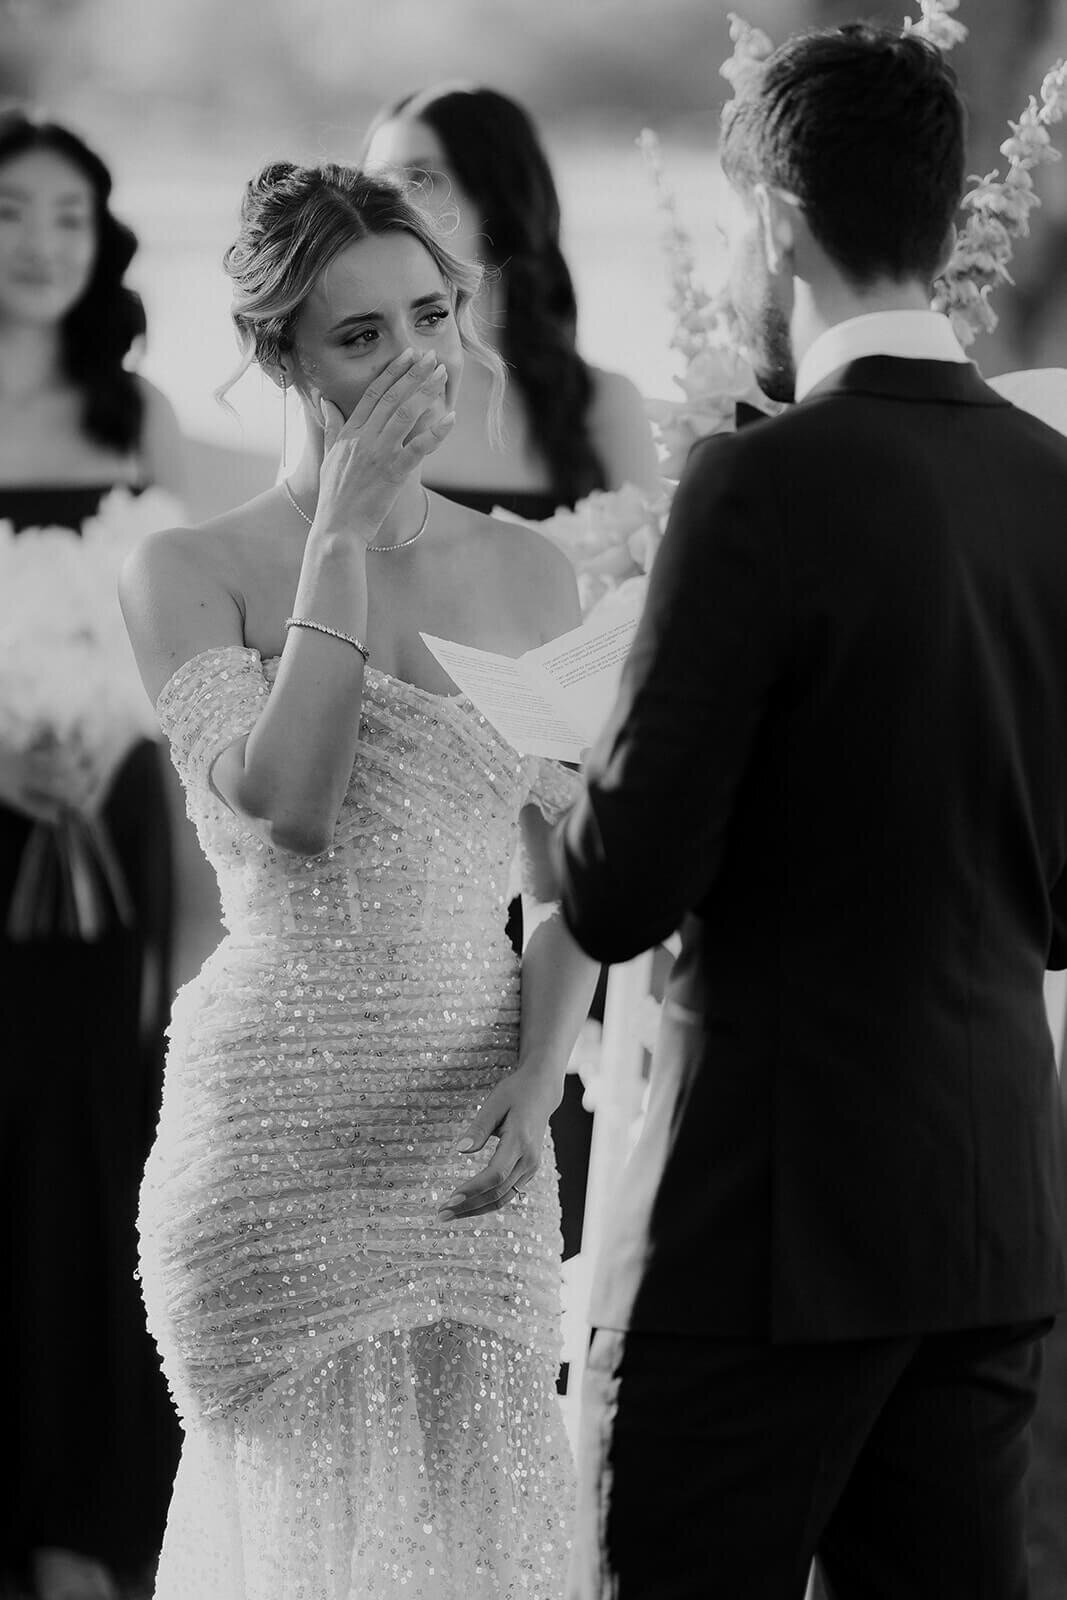 Bride crying during the ready of the vows